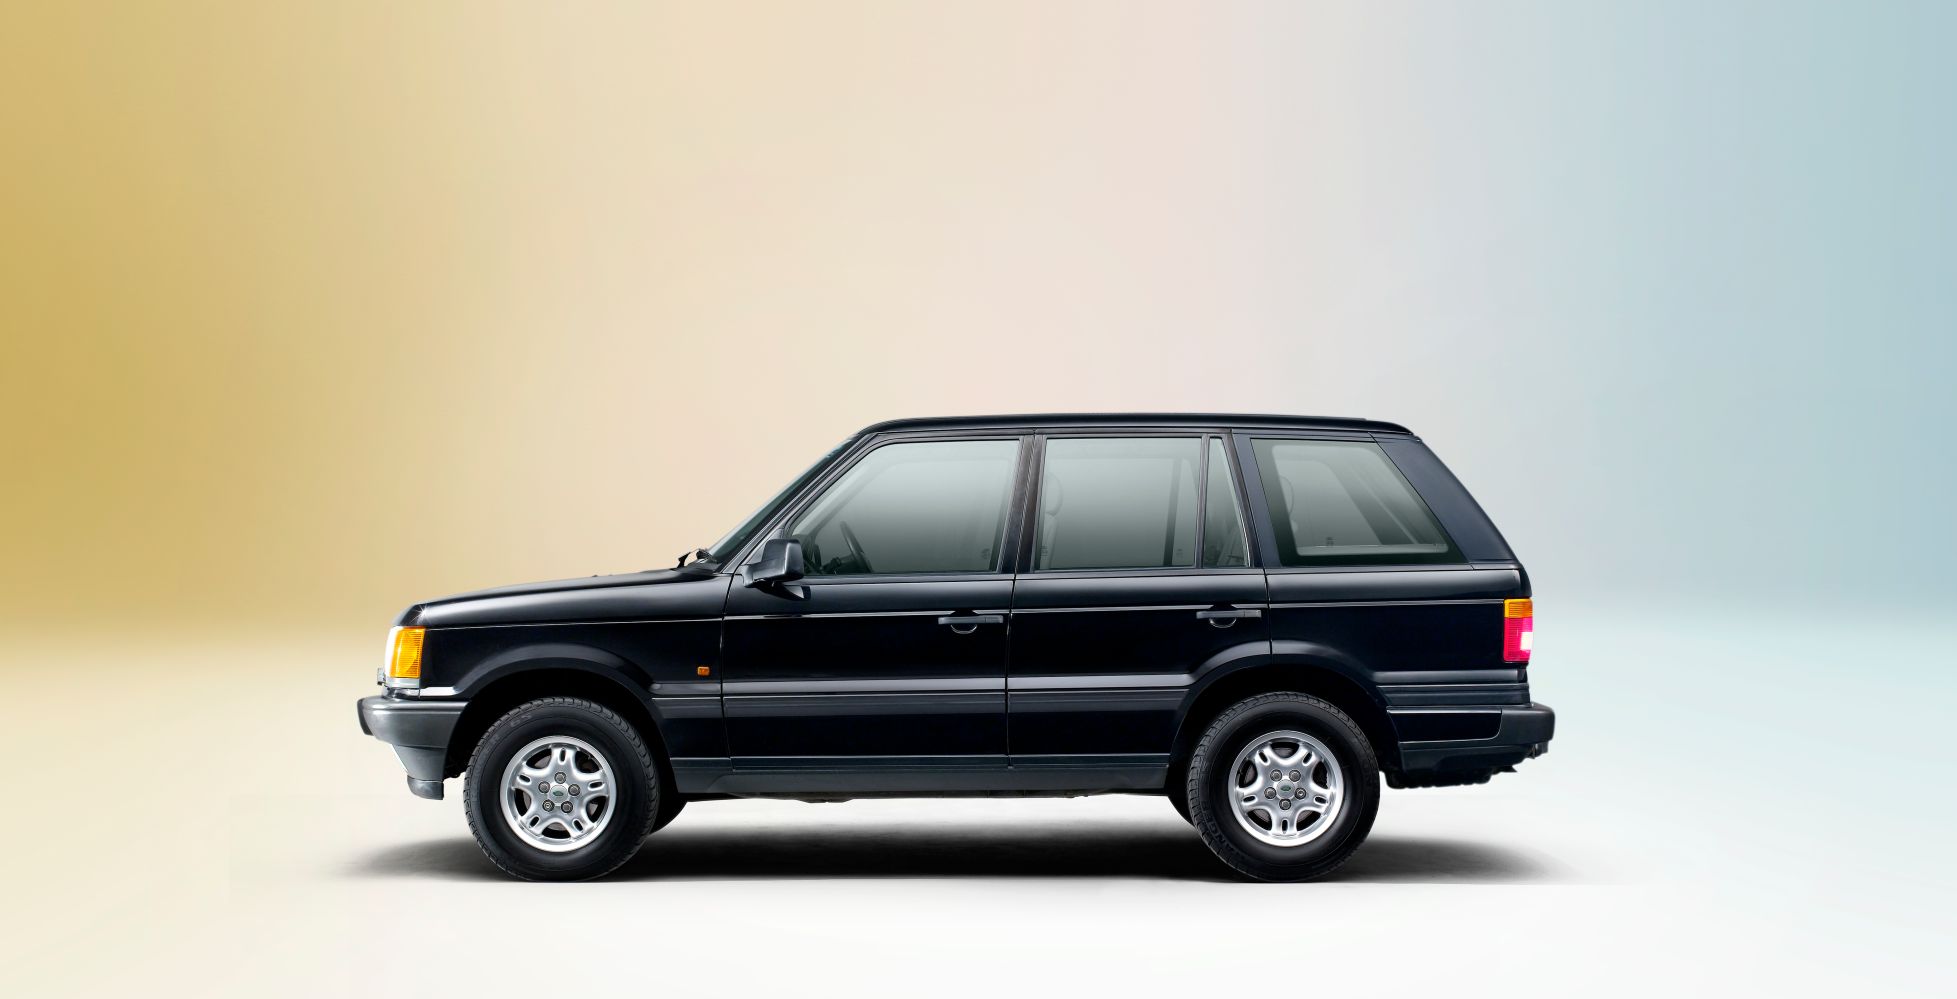 <p>The first-generation Range Rover was sold for nearly 25 years, with continual small improvements but no major redesigns. That changed with the unveiling of the 1995 Land Rover Range Rover, known internally as “P38.” Unlike the first-generation Range Rover, the P38 was designed from the start as a luxurious, high-end vehicle, with height-adjustable air suspension, Connolly leather upholstery, and in later models, optional satellite navigation. During production of the P38 Range Rover, the Land Rover company was sold to BMW, then later taken over in 2000 by Ford. </p>